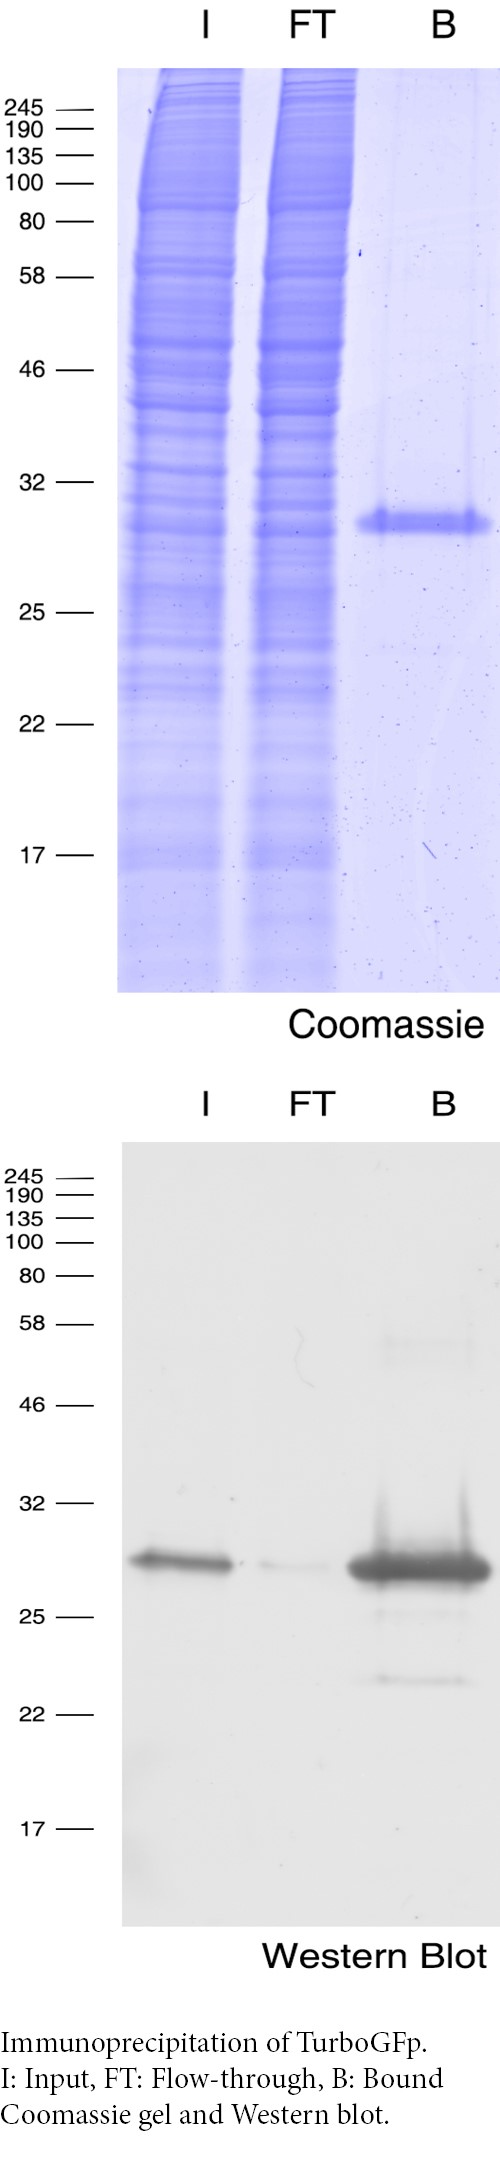 Immunoprecipitation of TurboGFP. I: Input, FT: Flow-through, B: Bound. Coomassie blue stained gel and Western blot.